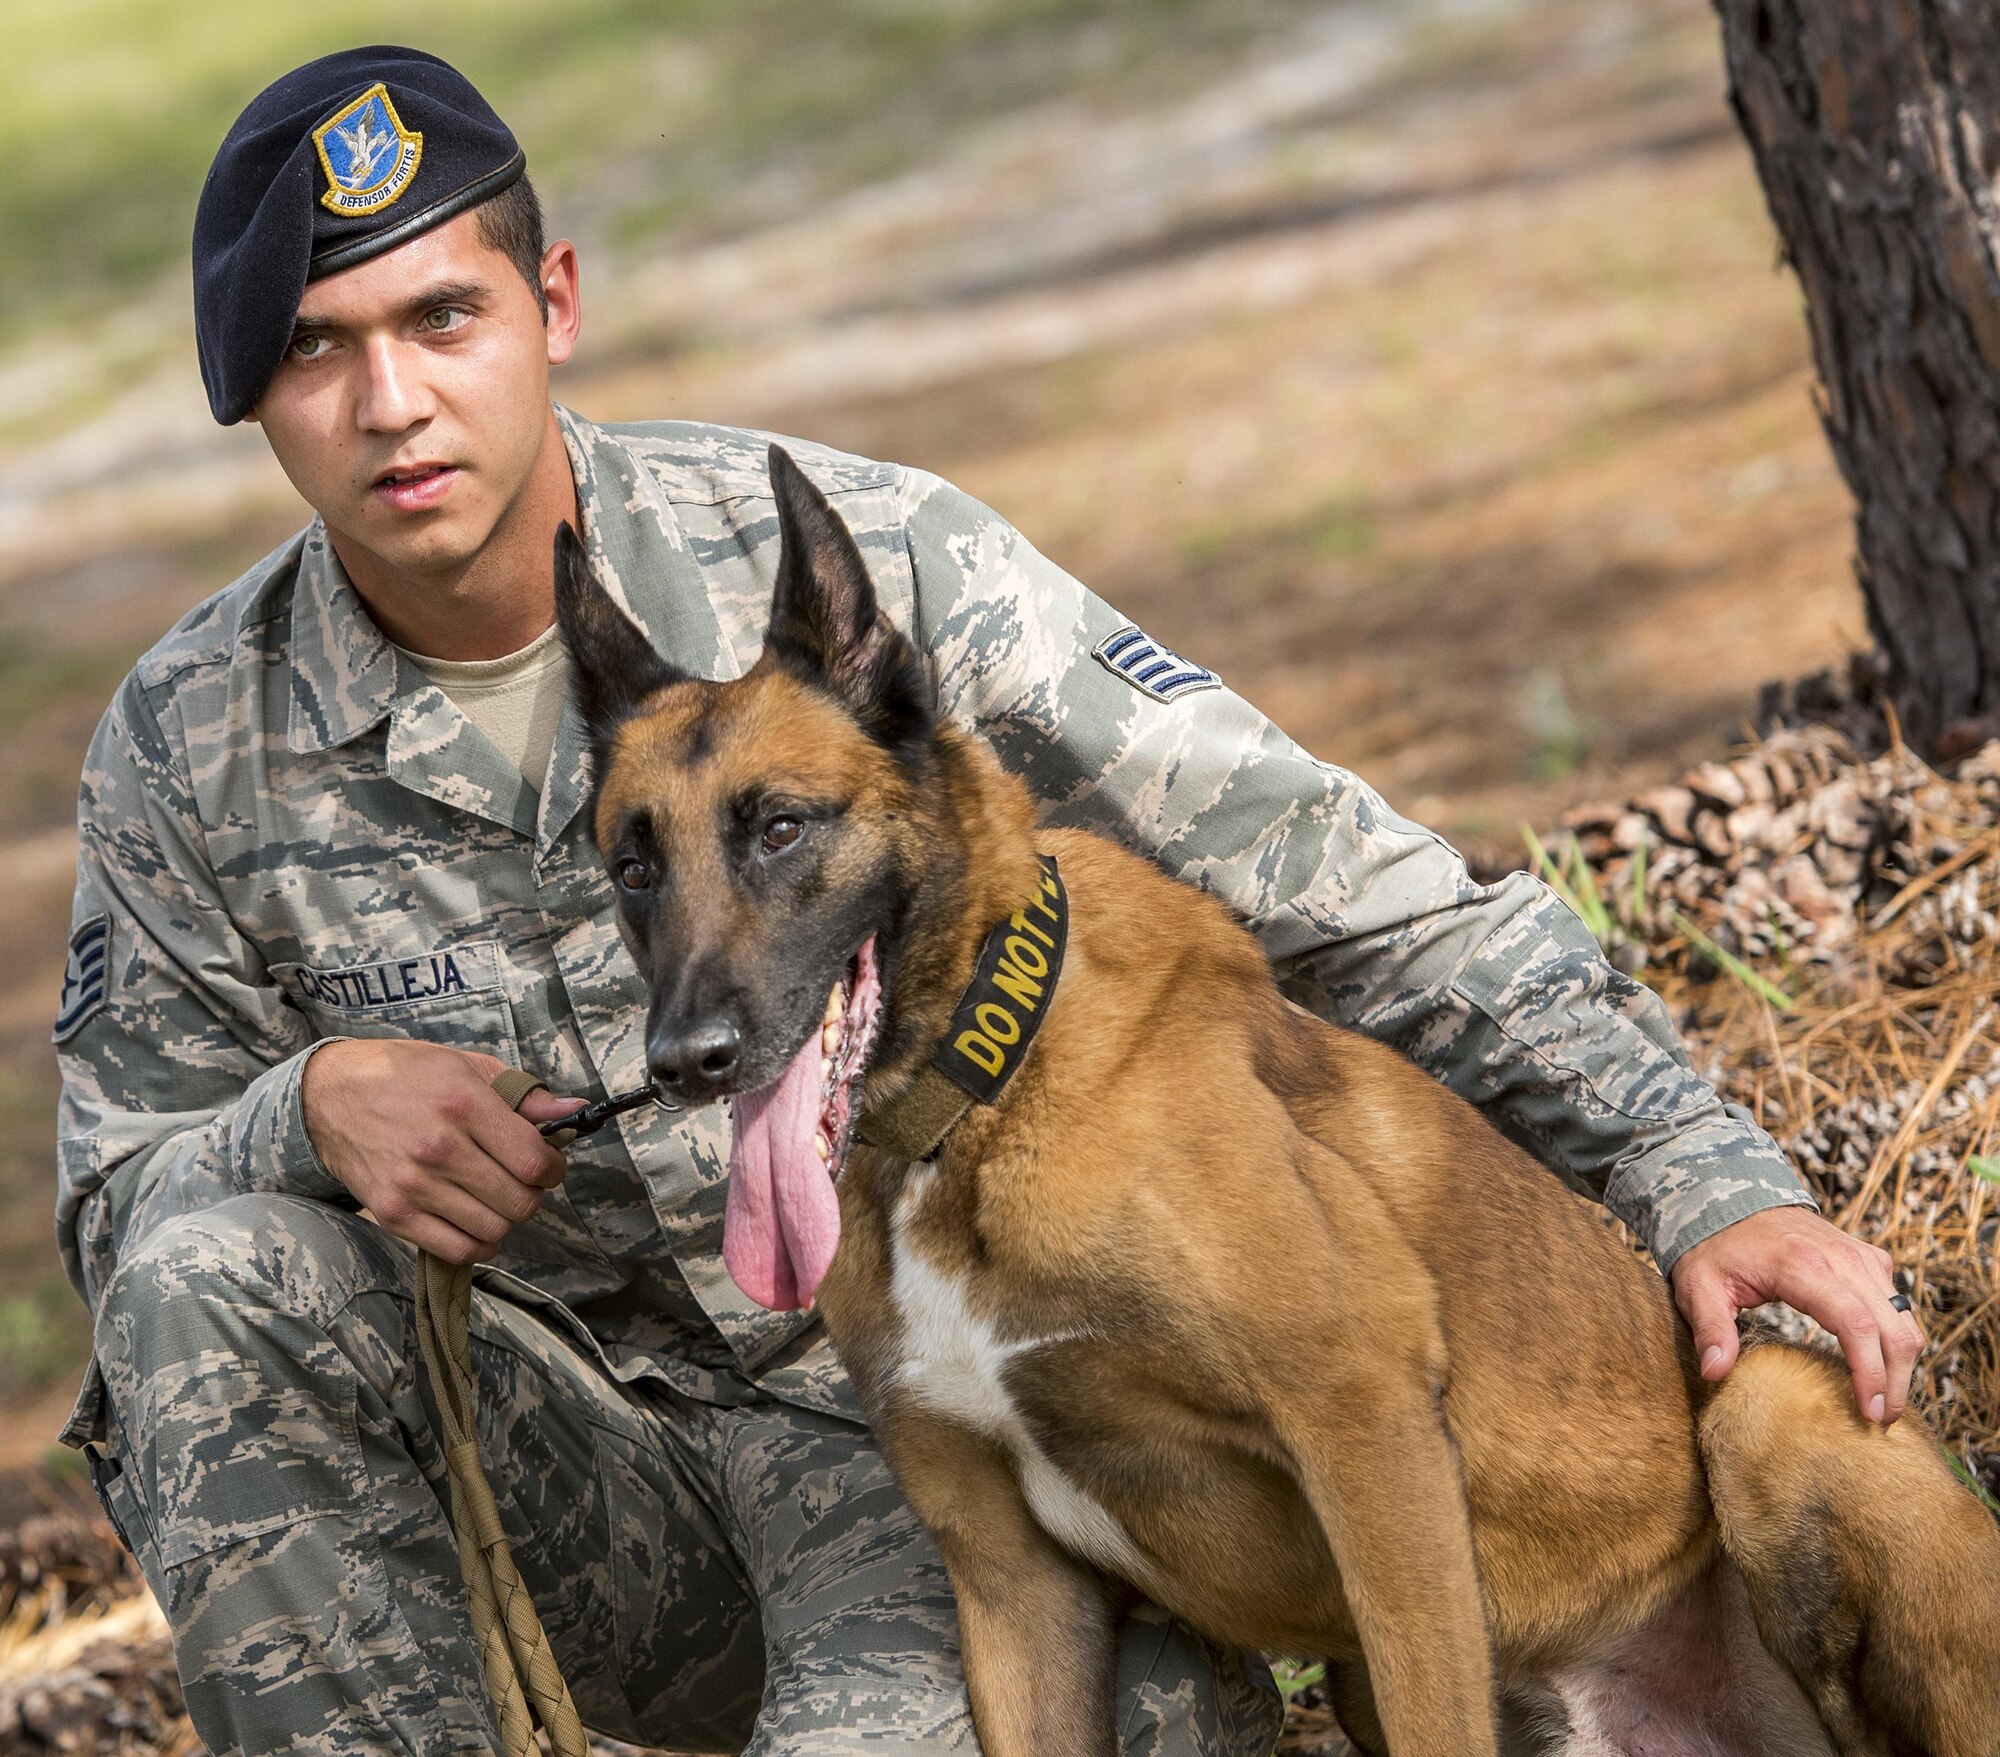 Staff Sgt. Michael Castilleja and Arko, 96th Security Forces Squadron, sit together after a military working dog demonstration for Eglin Elementary School kids May 18 at Eglin Air Force Base, Fla. The event was in celebration of National Police Week. More than 100 children watched the demonstration. (U.S. Air Force photo/Samuel King Jr.)